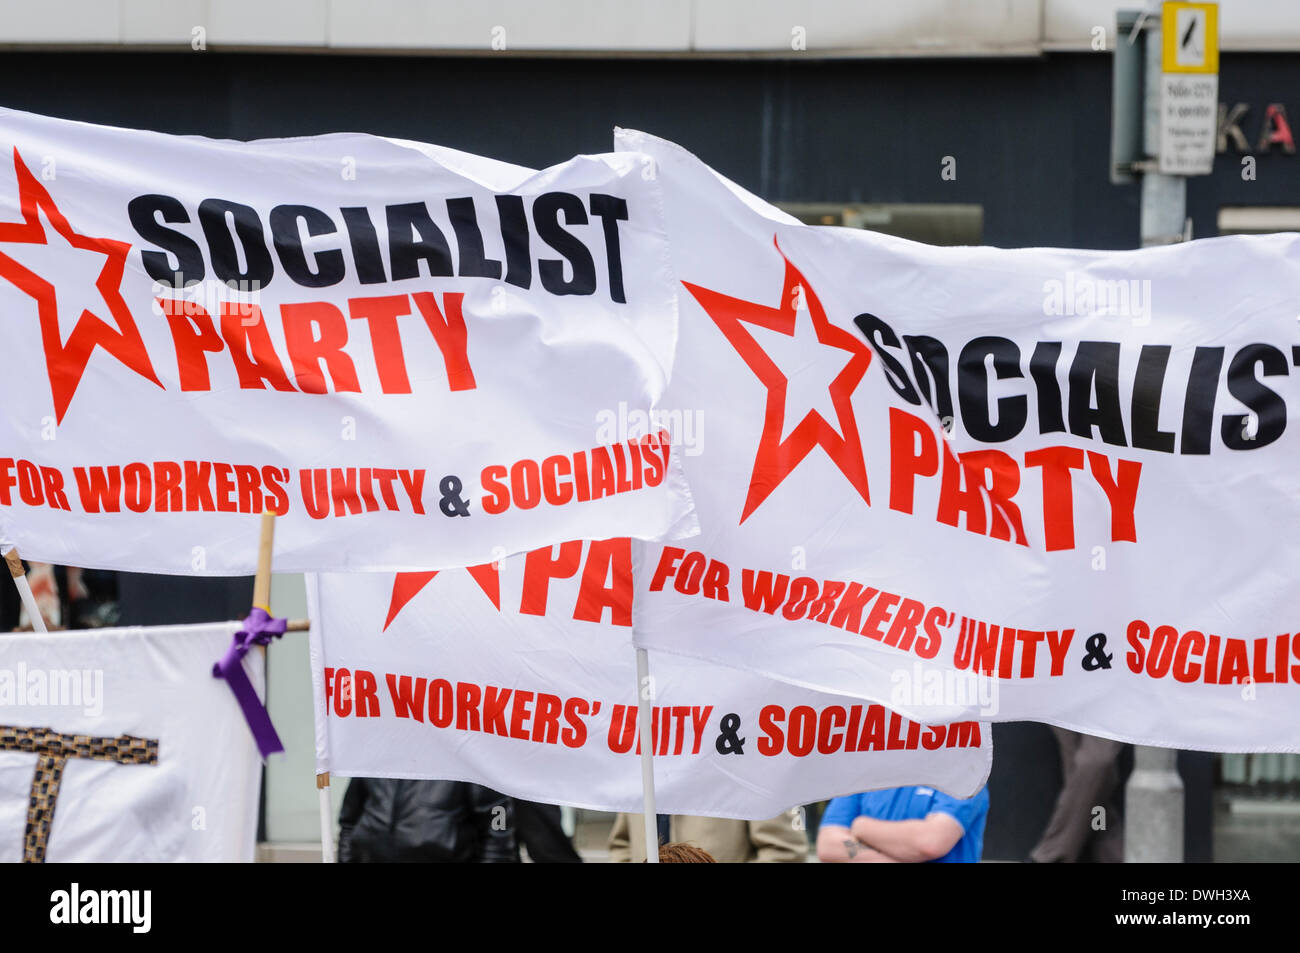 Belfast, Northern Ireland. 8 Mar 2014 - Socialist Party flags flying in the wind Credit:  Stephen Barnes/Alamy Live News Stock Photo